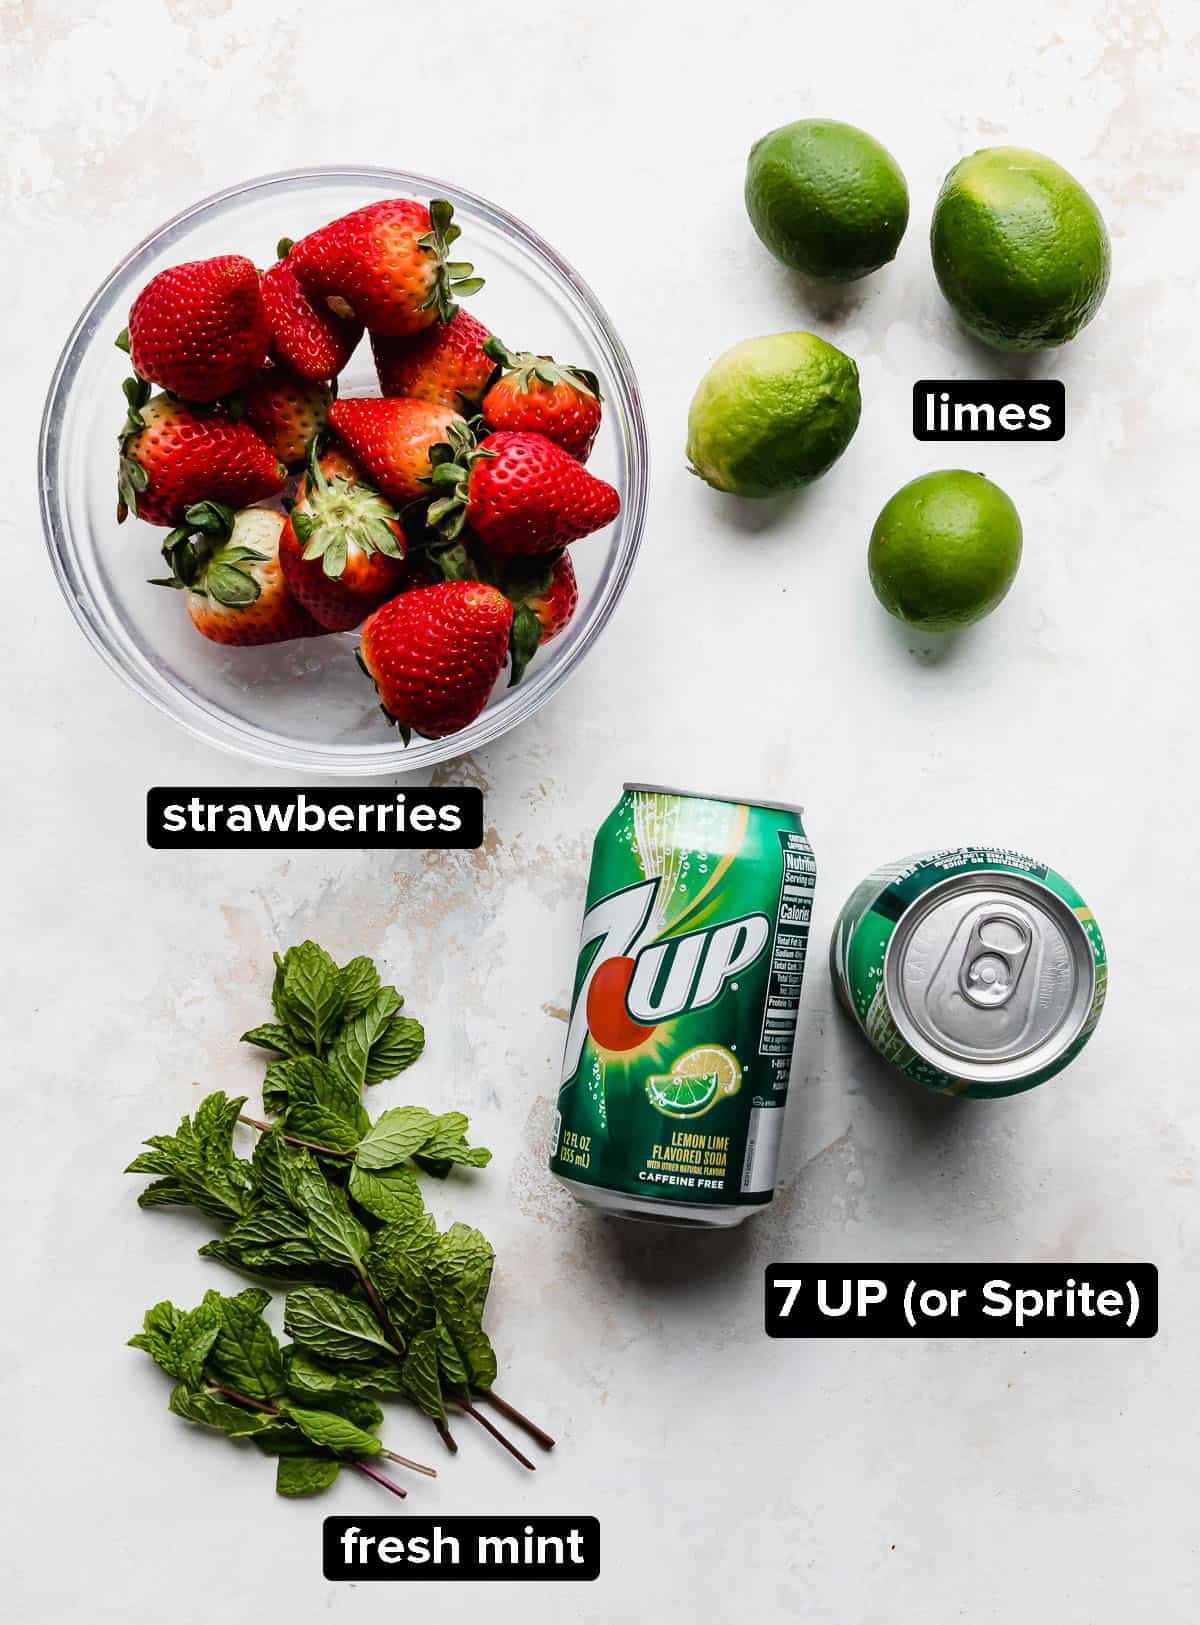 Strawberry Mocktail ingredients on a white background: limes, strawberries, mint, and Sprite or 7 UP.